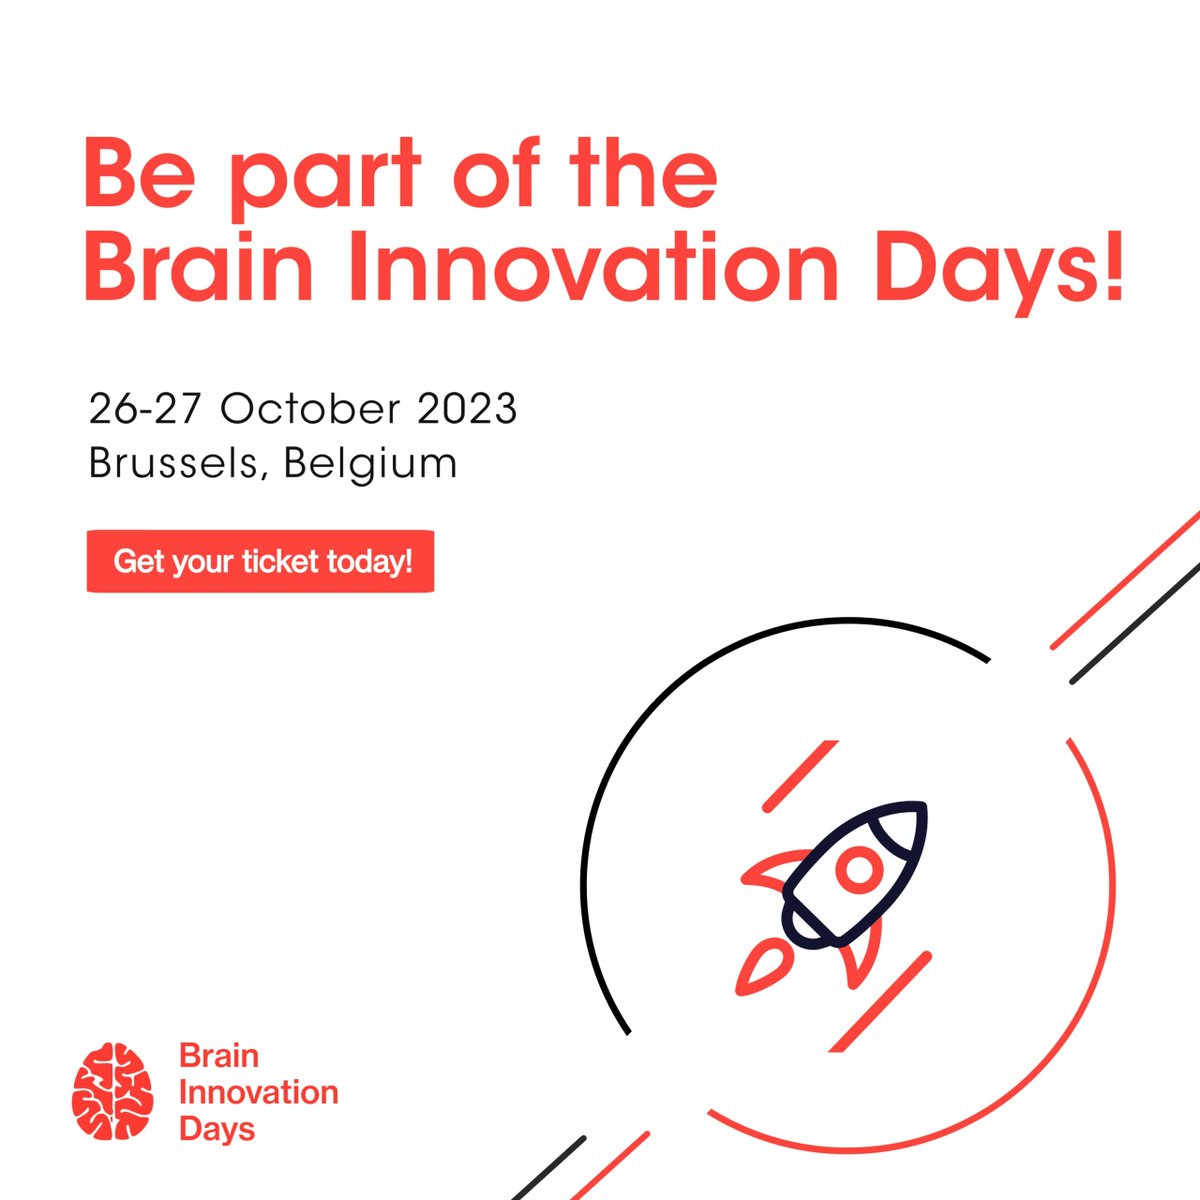 Catch us in Brussels this Thursday & Friday at the #Brain #Innovation Days. We're looking forward to talk about the importance of innovation in boosting brain #health & preventing brain disorders. ℹ️braininnovationdays.eu #RareDisease #Migraine #Alzheimers #MultipleSclerosis